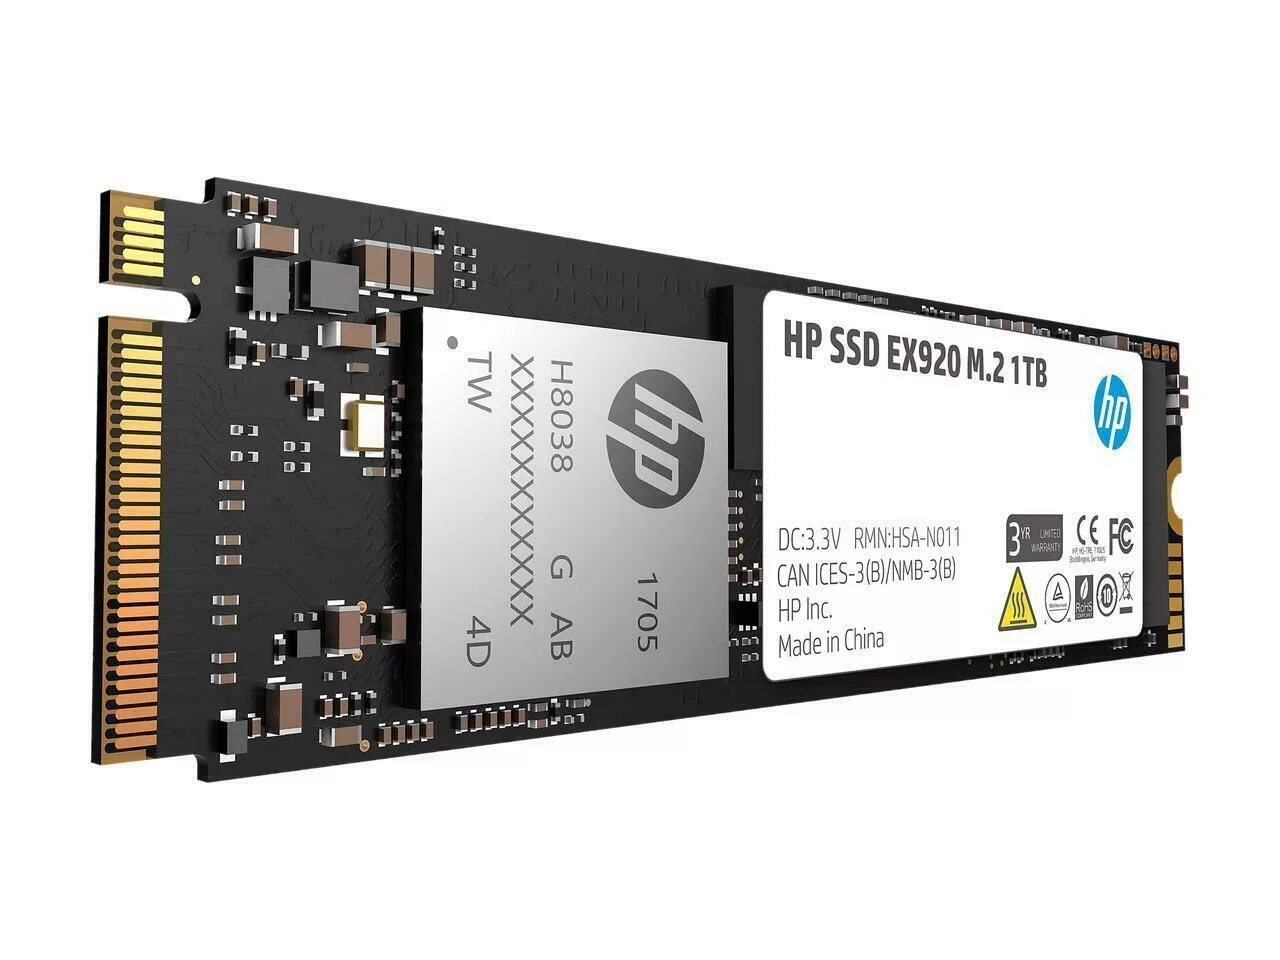 SSD m2 NVME 512gb. Ssd product